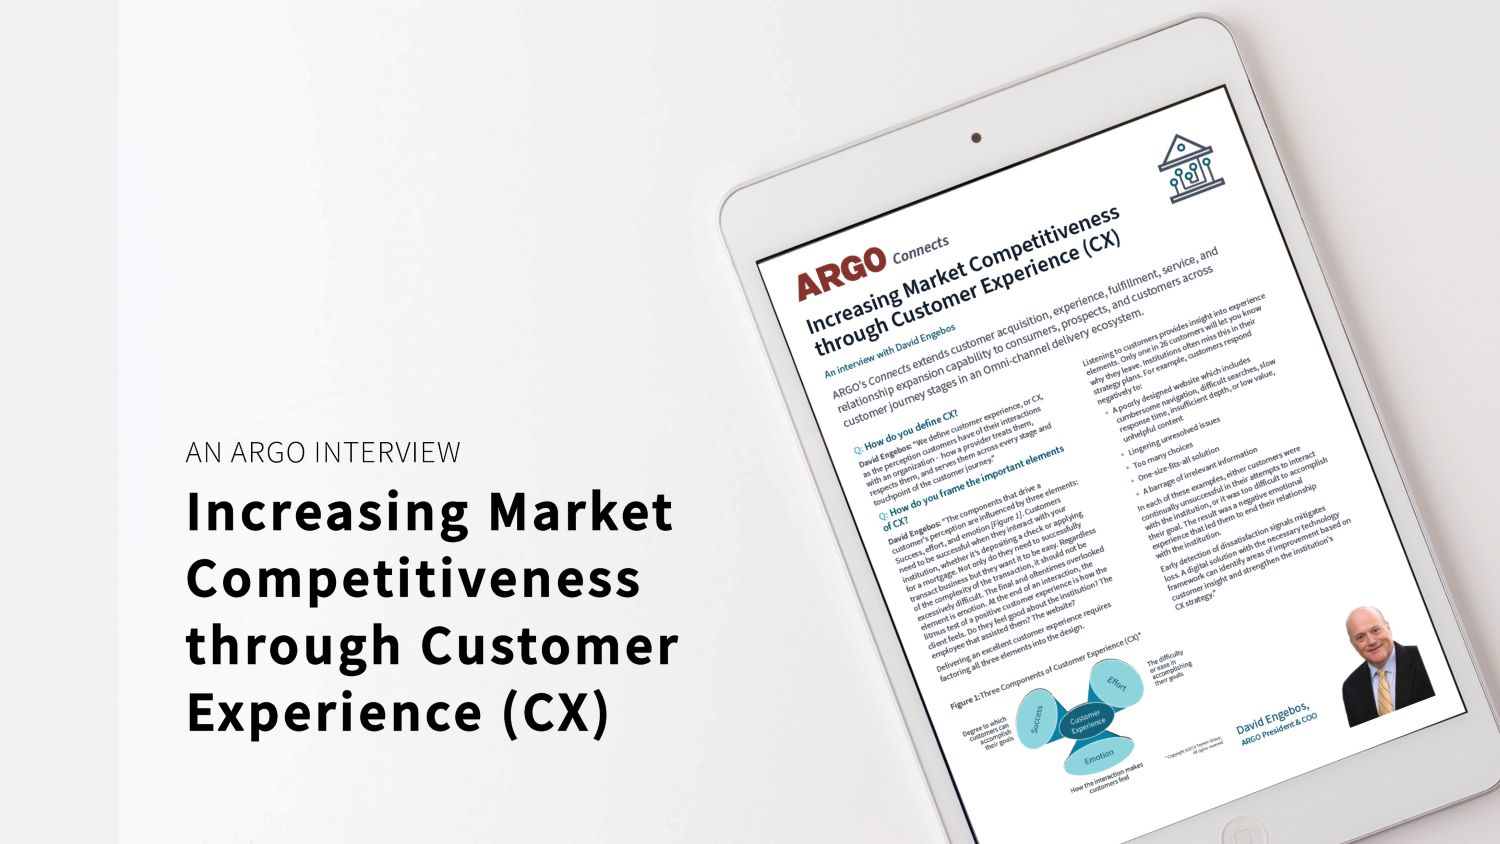 Increasing Market Competitiveness through Customer Experience (CX) 052322 -RESIZED[28]